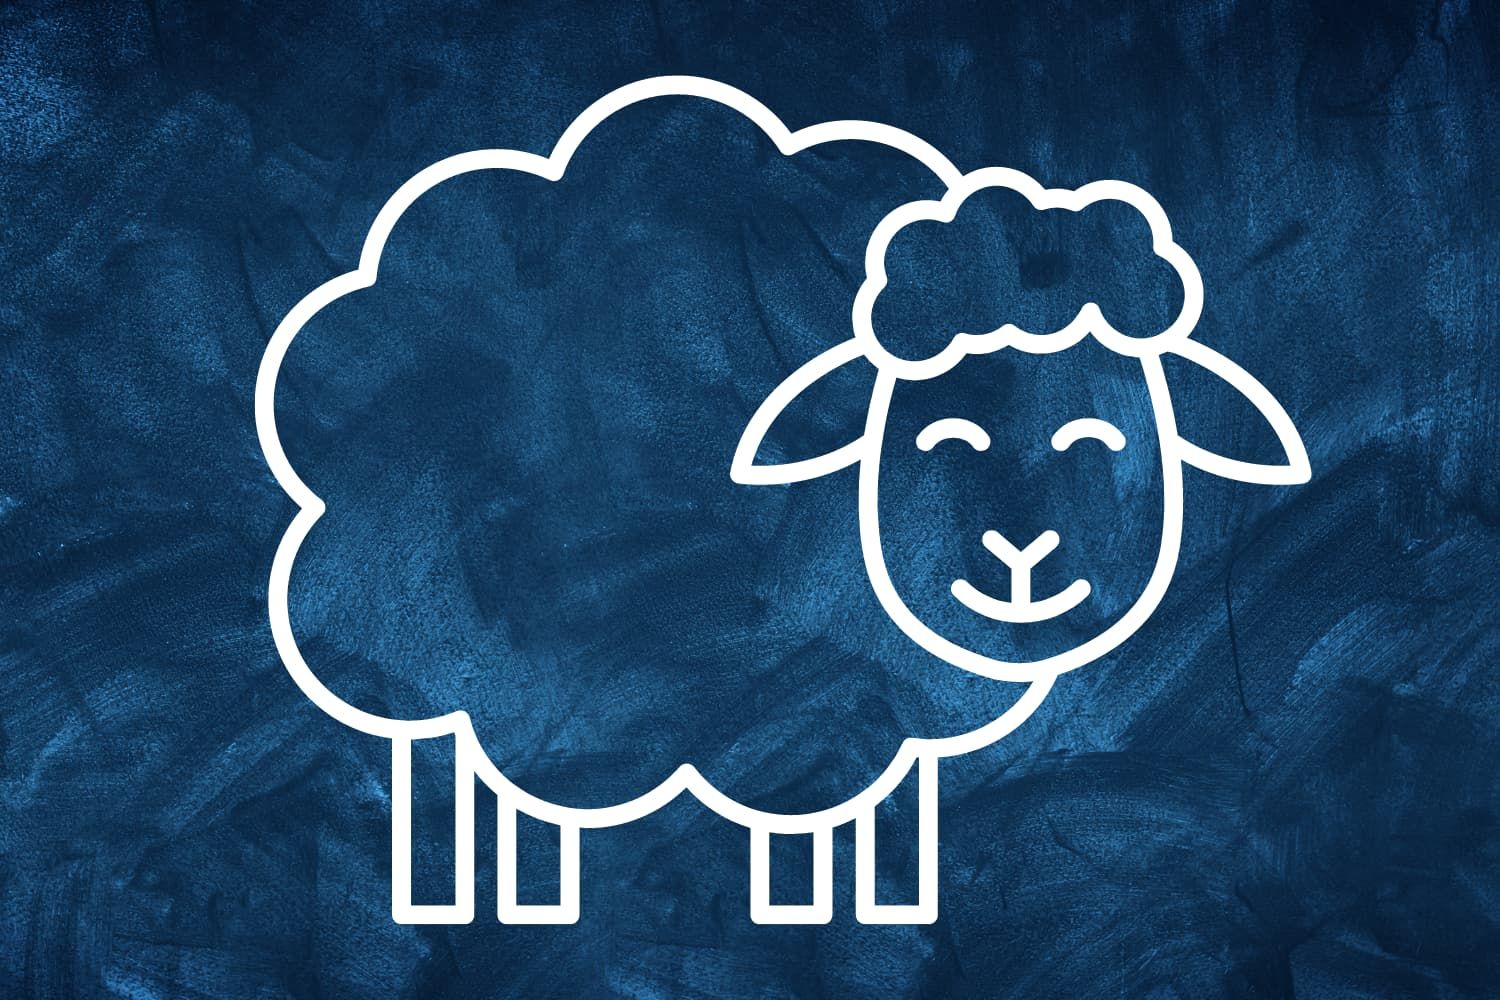 Craft%20-%20NT%20Parable%20of%20the%20lost%20sheep%20-%20Create%20a%20sheep-ea90aa6b Crafts